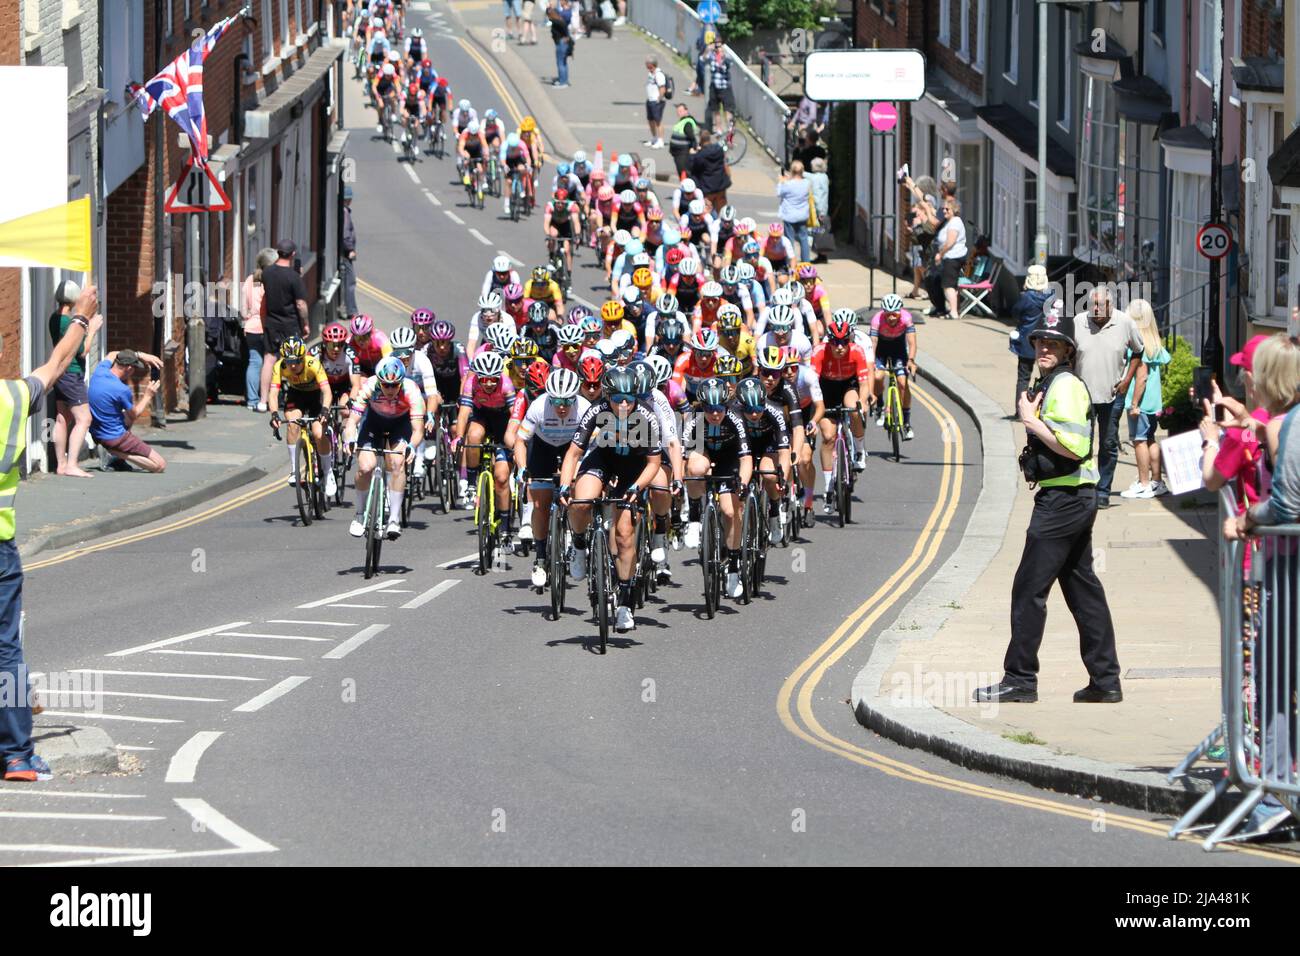 Maldon, UK. 27th May 2022. Stage one of the RideLondon Classique 2022 women's cycle race, part of the UCI Women’s World Tour calendar. The peloton is strung out as they climb up Market Hill in Maldon, Essex. Credit: Eastern Views/Alamy Live News Stock Photo